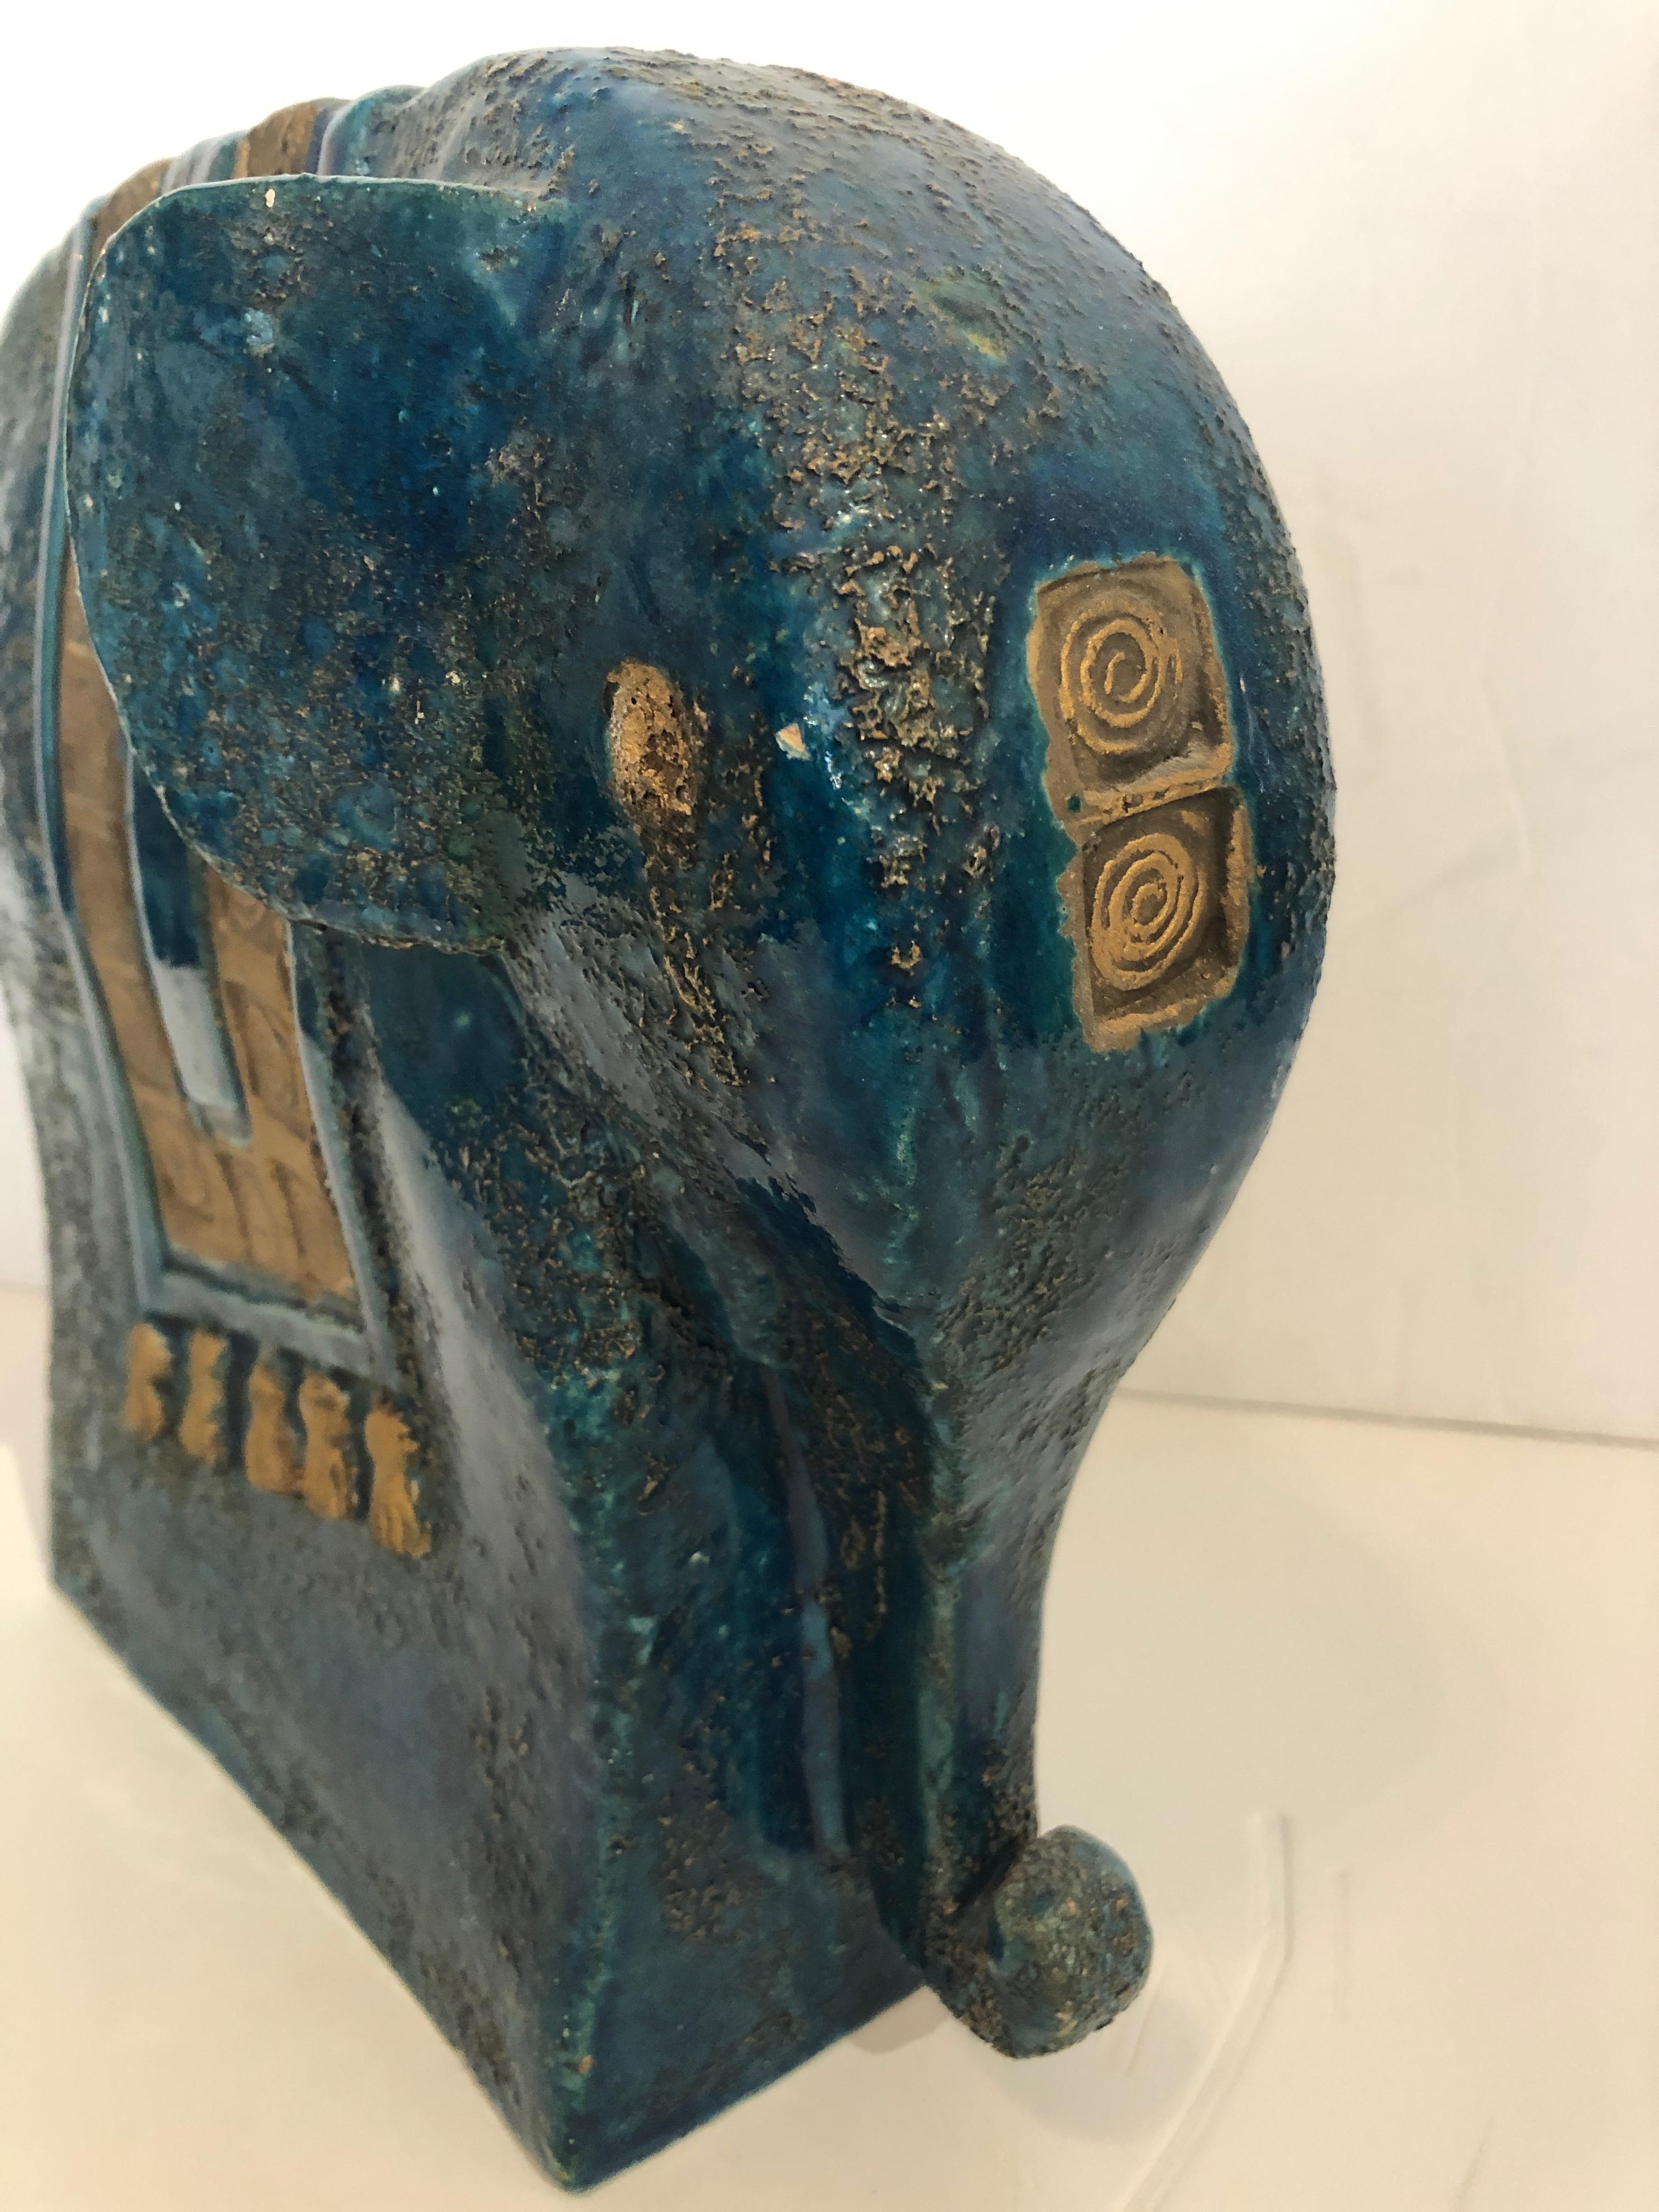 A rare fairly large whimsical elephant by Aldo Londi for Bitossi having gorgeous turquoise and gilded glaze, geometric decoration and tassels.